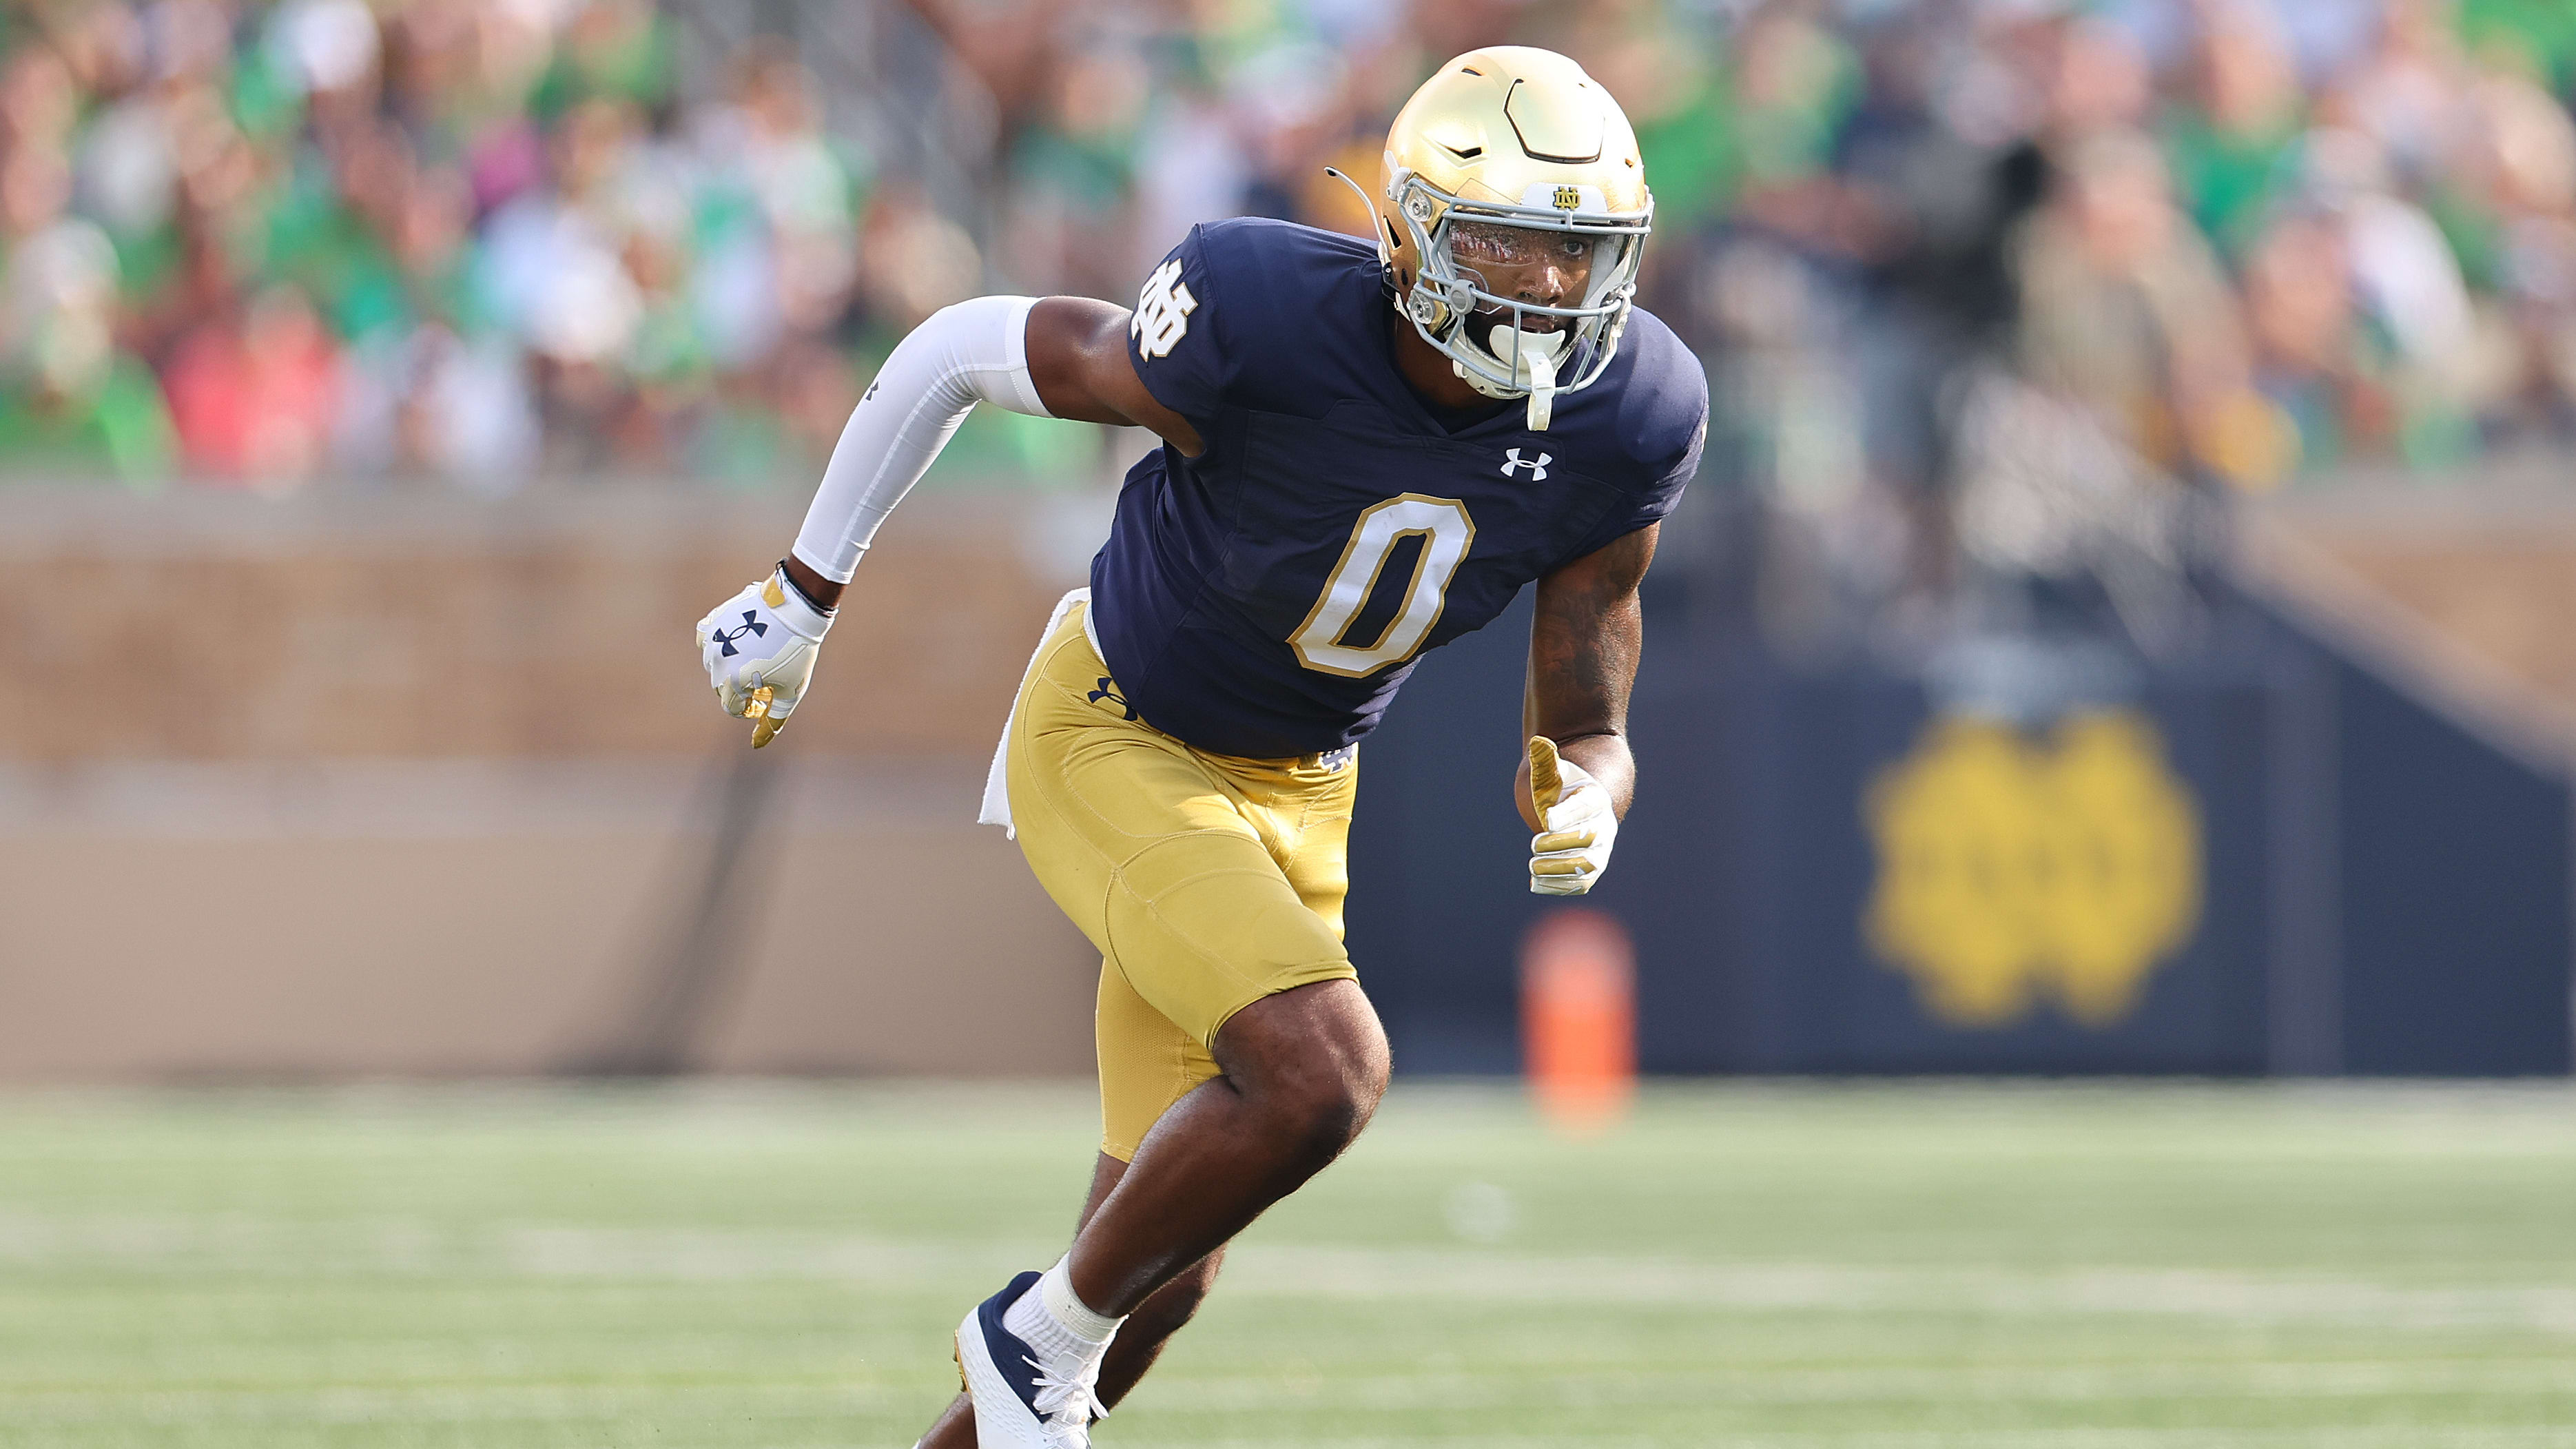 Sports Illustrated Notre Dame Fighting Irish News, Analysis and More